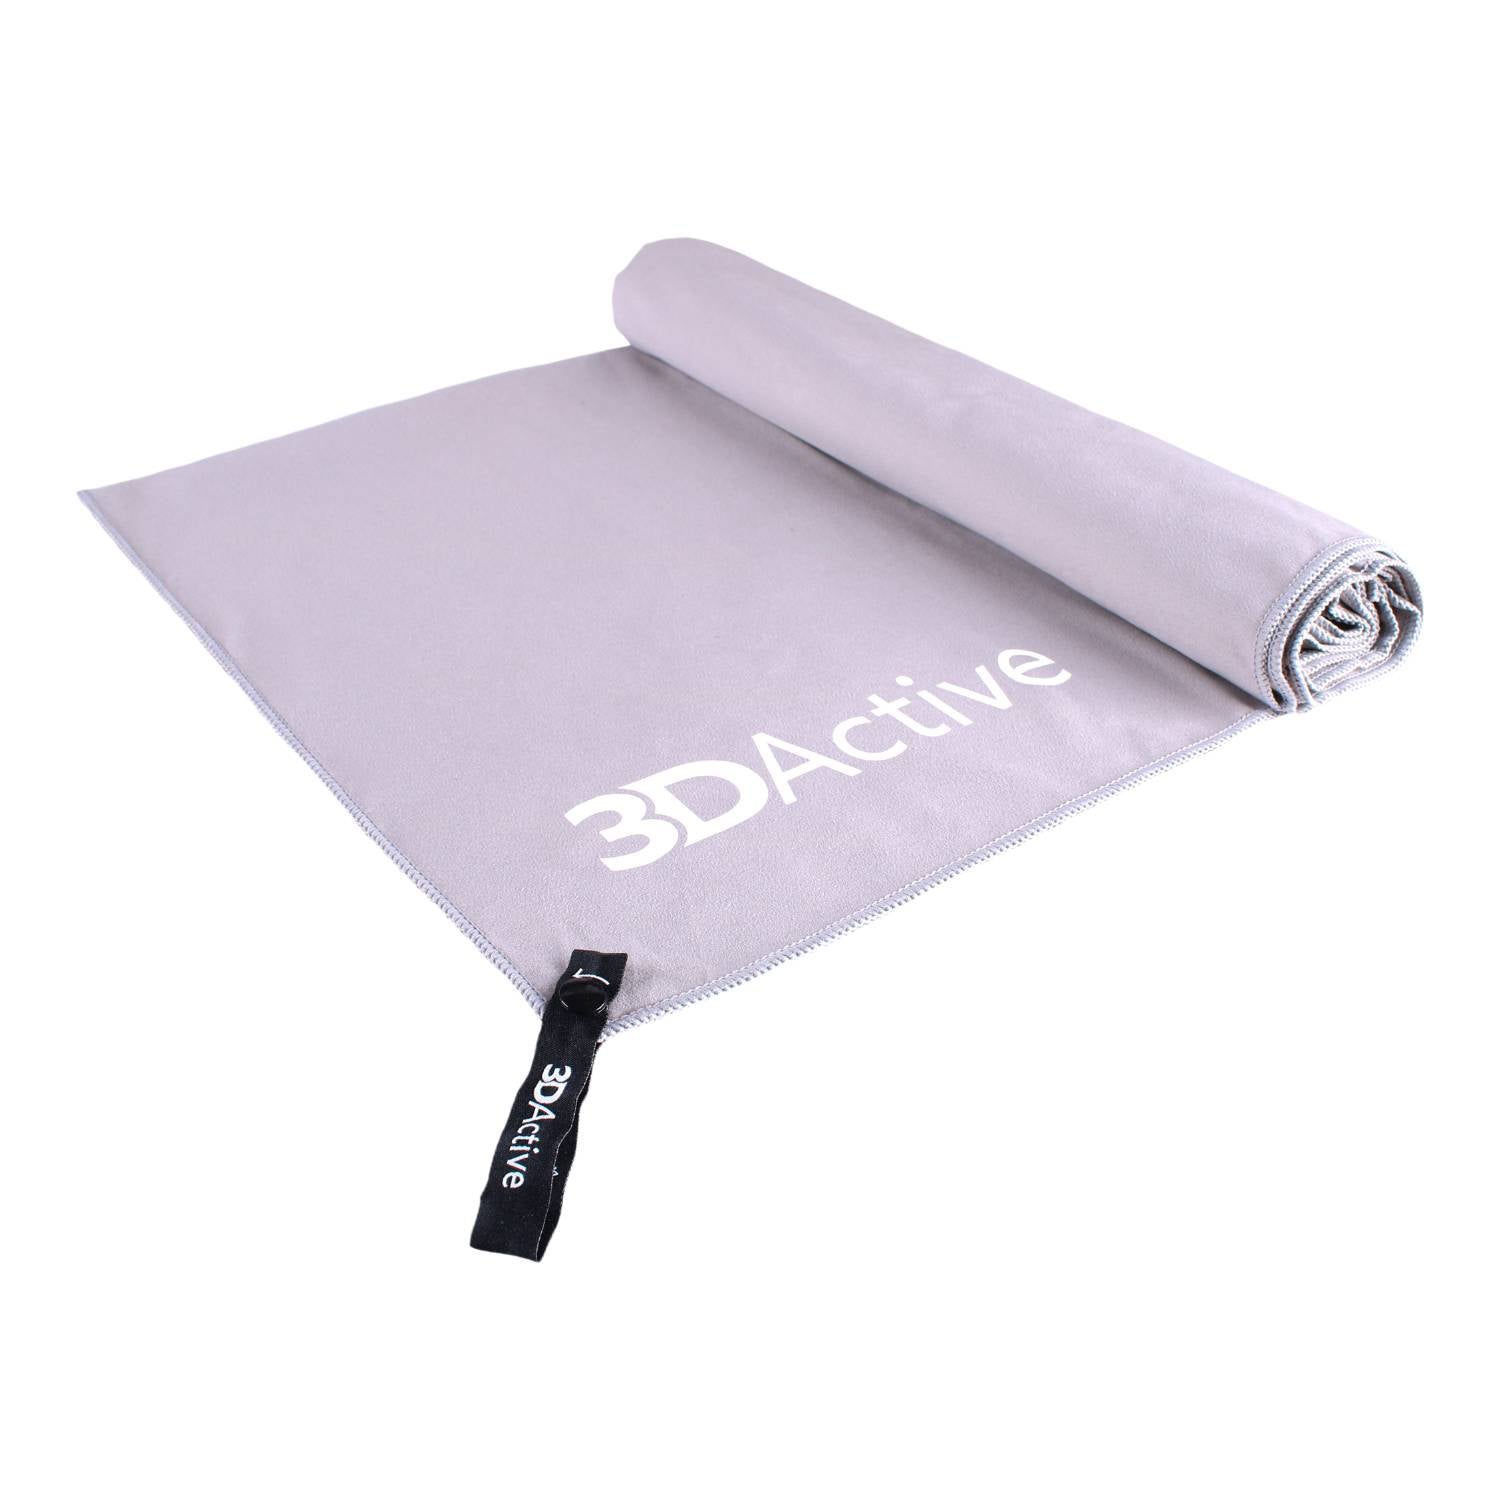 24x 42 Eco-friendly rPET Sublimated Microfiber Velour Gym Towel w/ Cotton  Terry Loops - GTRPET2442 - IdeaStage Promotional Products